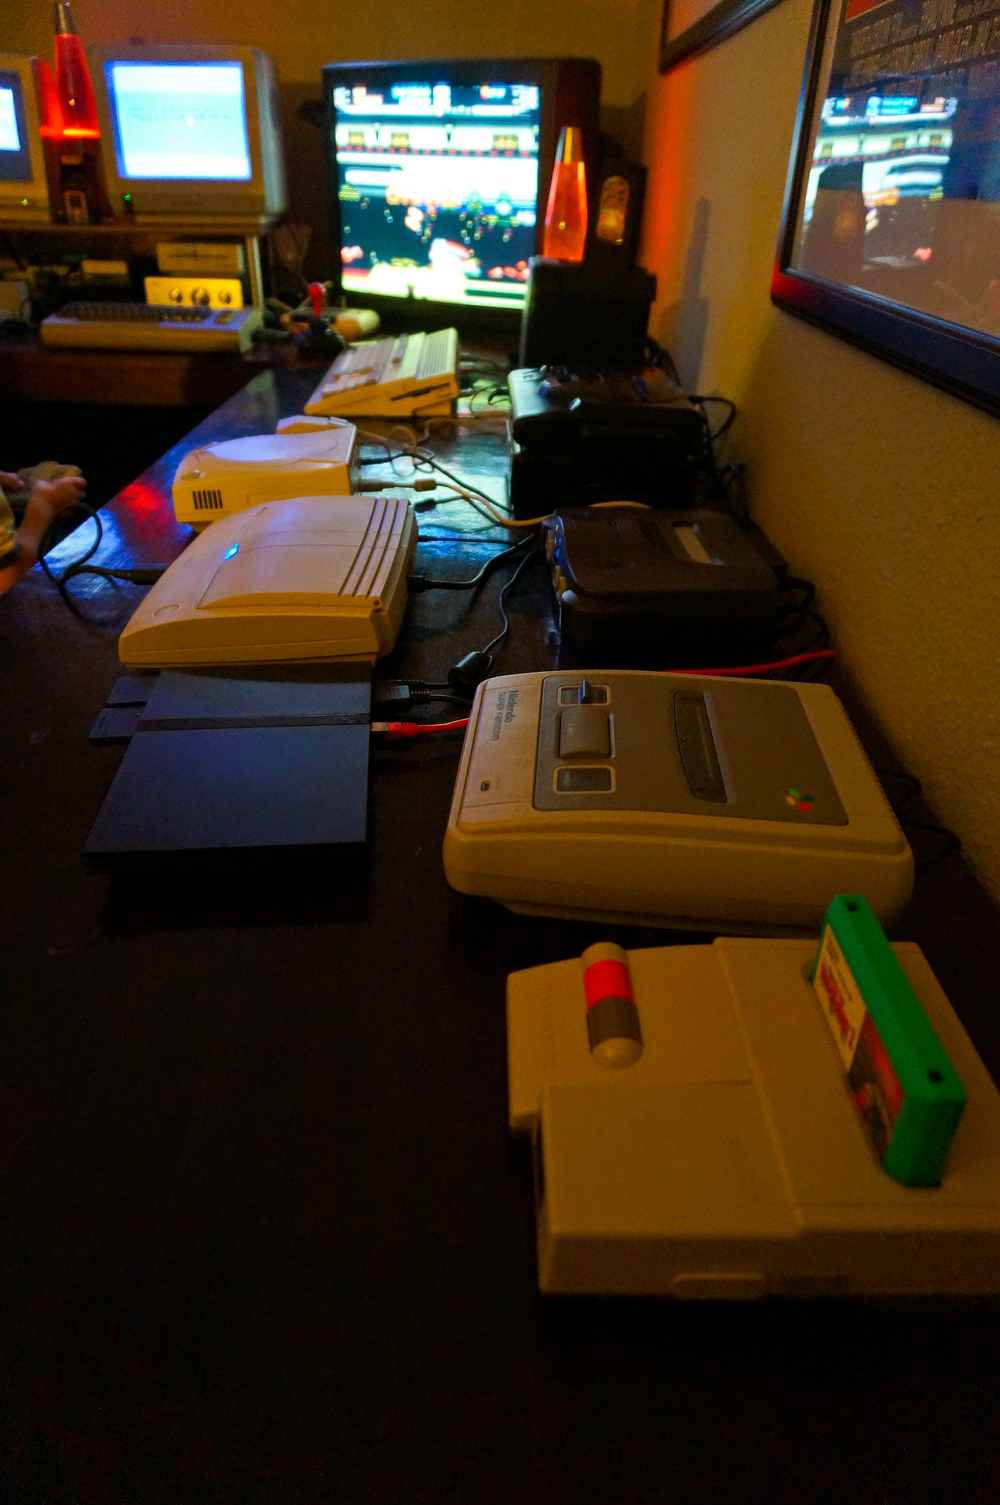 Lots of Consoles from the past